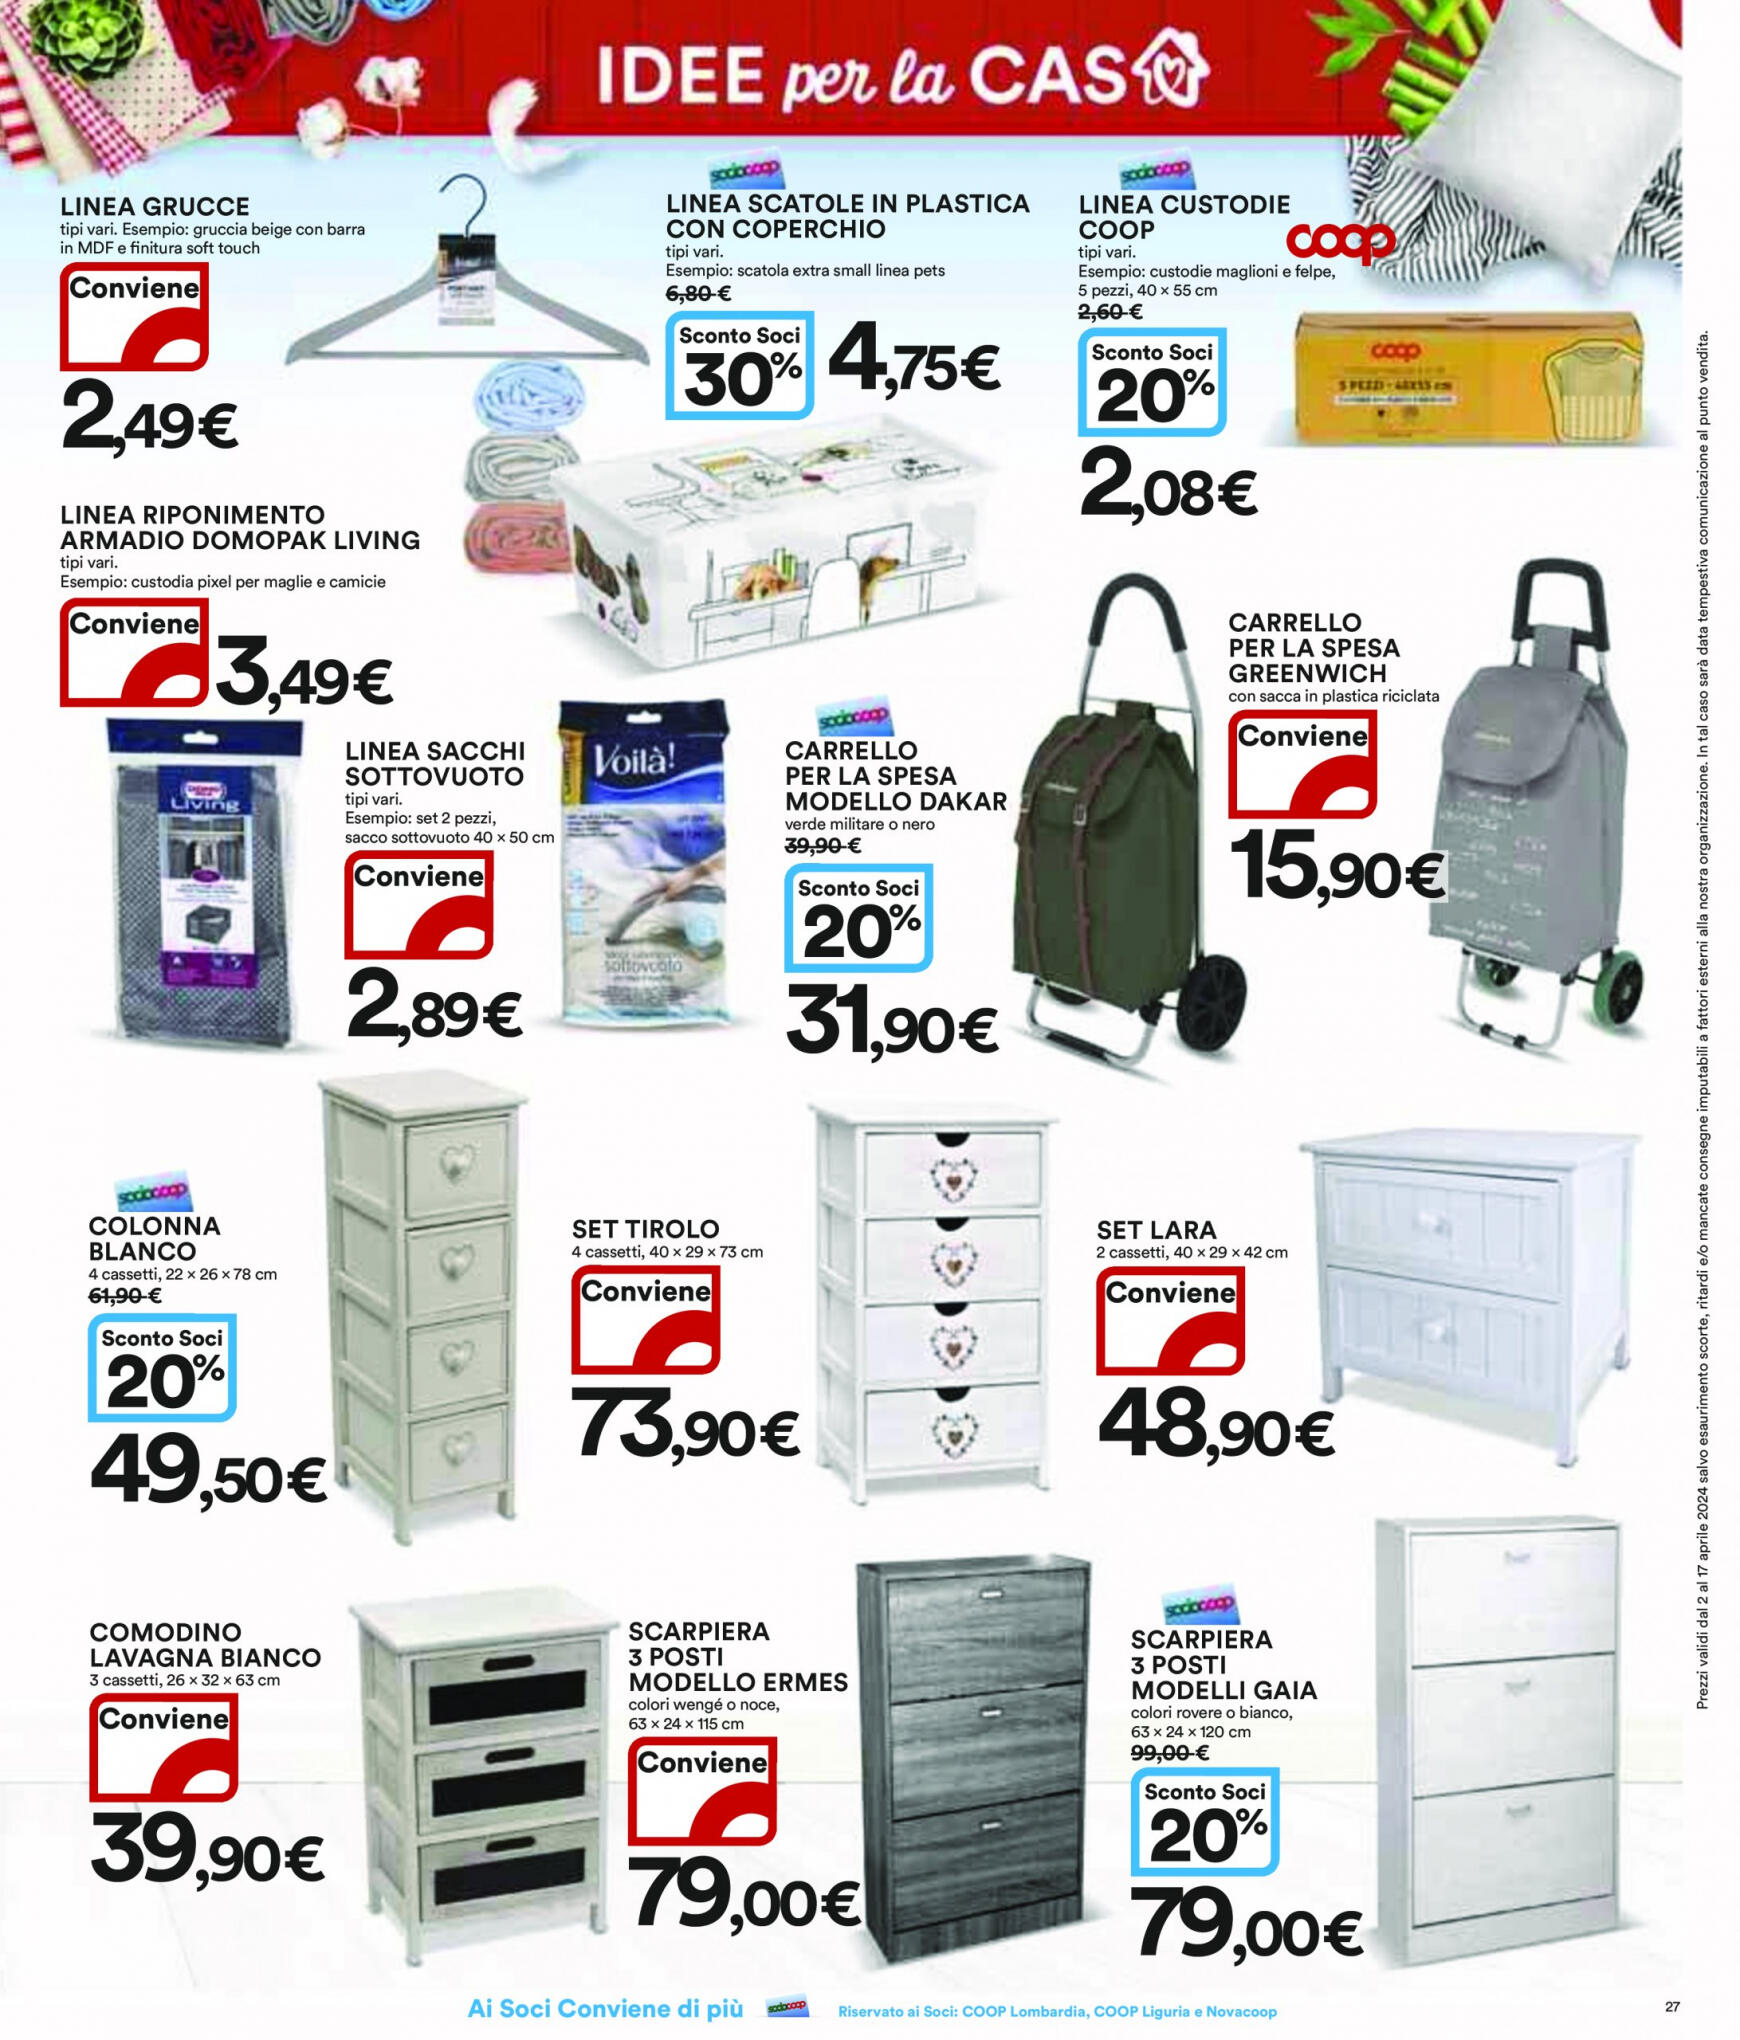 coop - Nuovo volantino Coop 02.04. - 17.04. - page: 27